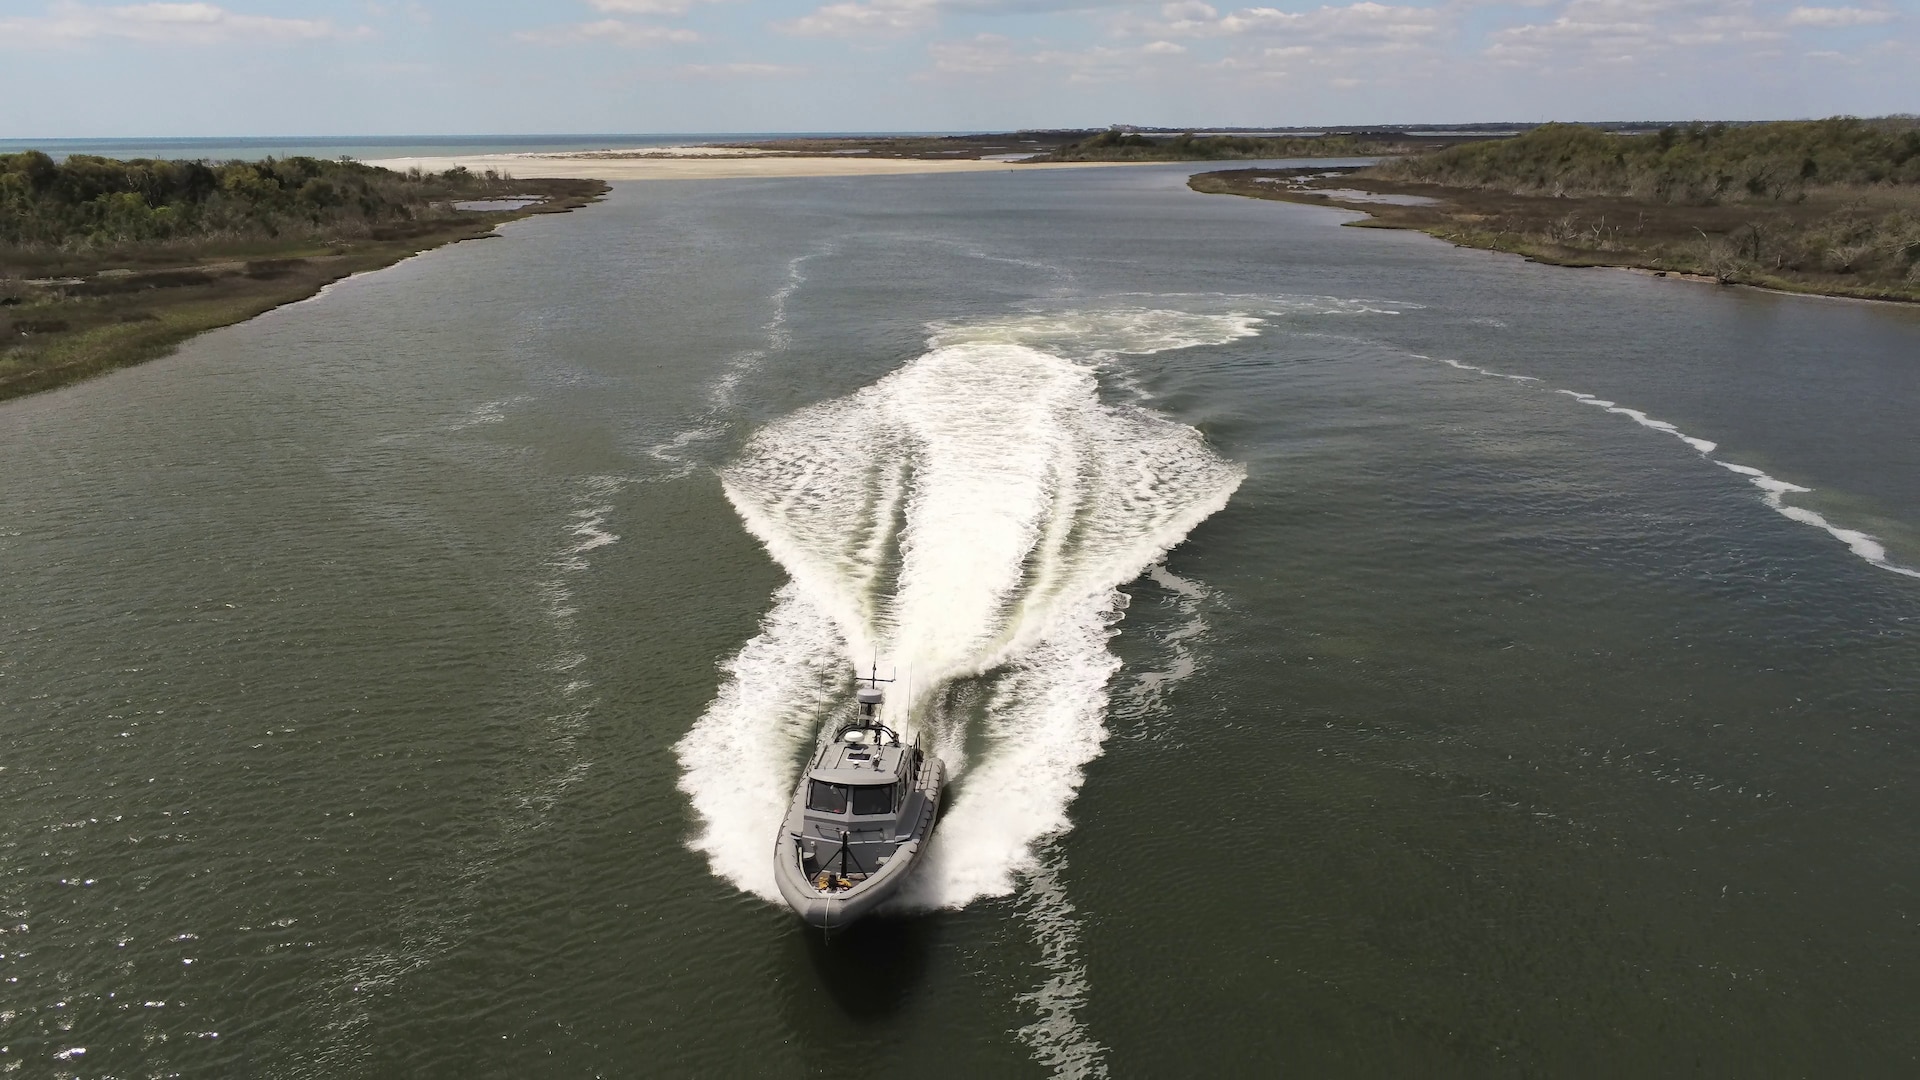 Carderock’s Autonomous Lab and Integration Center team demonstrating their unmanned surface vessel, Hammerhead Hanna, along the Intracoastal Waterway near Camp Lejeune, N.C.